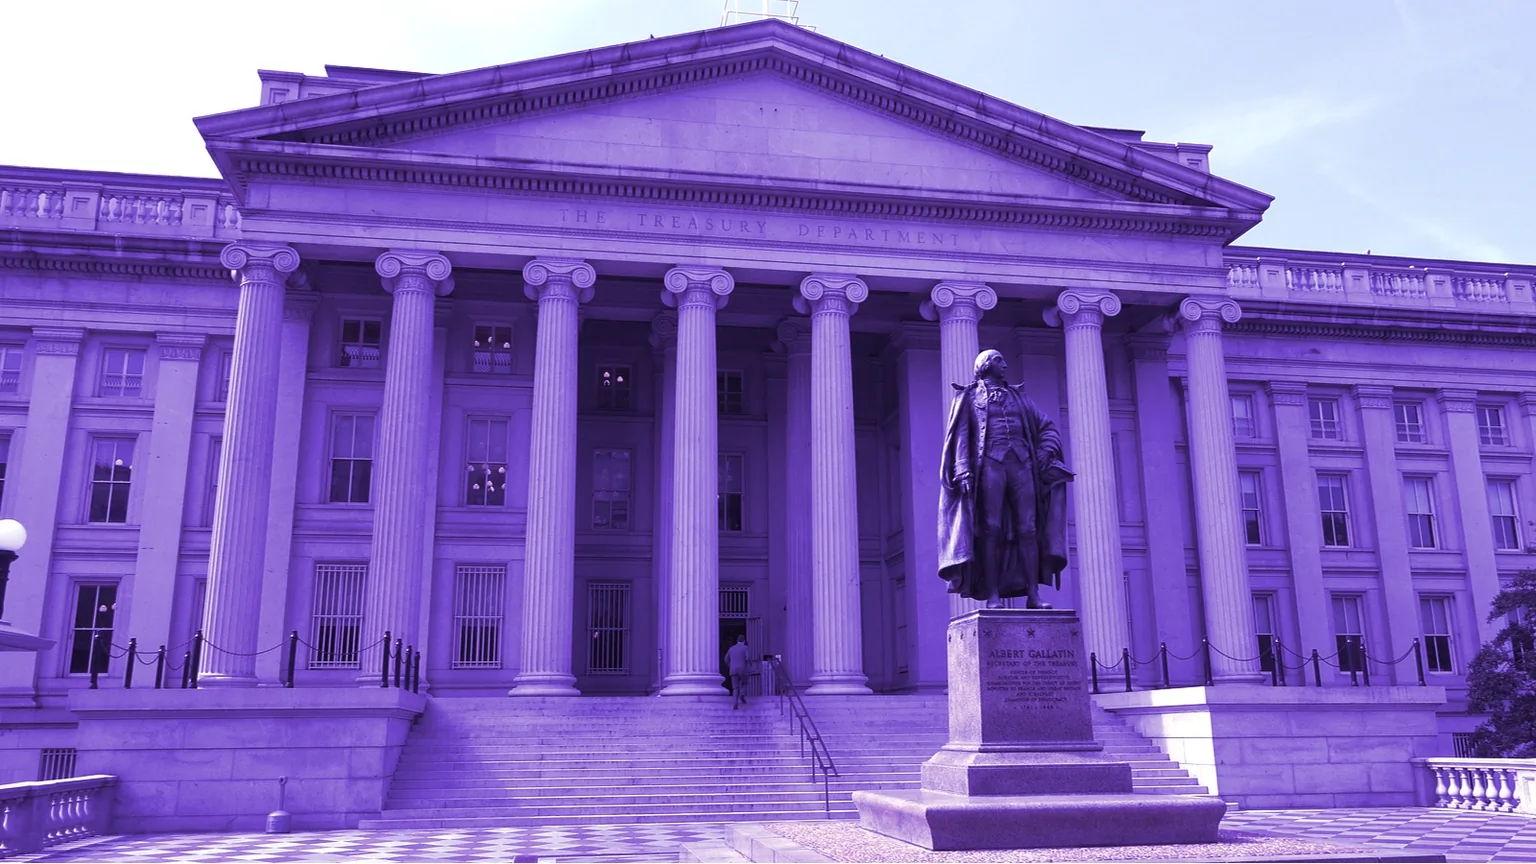 The United States Department of the Treasury. Image: Shutterstock